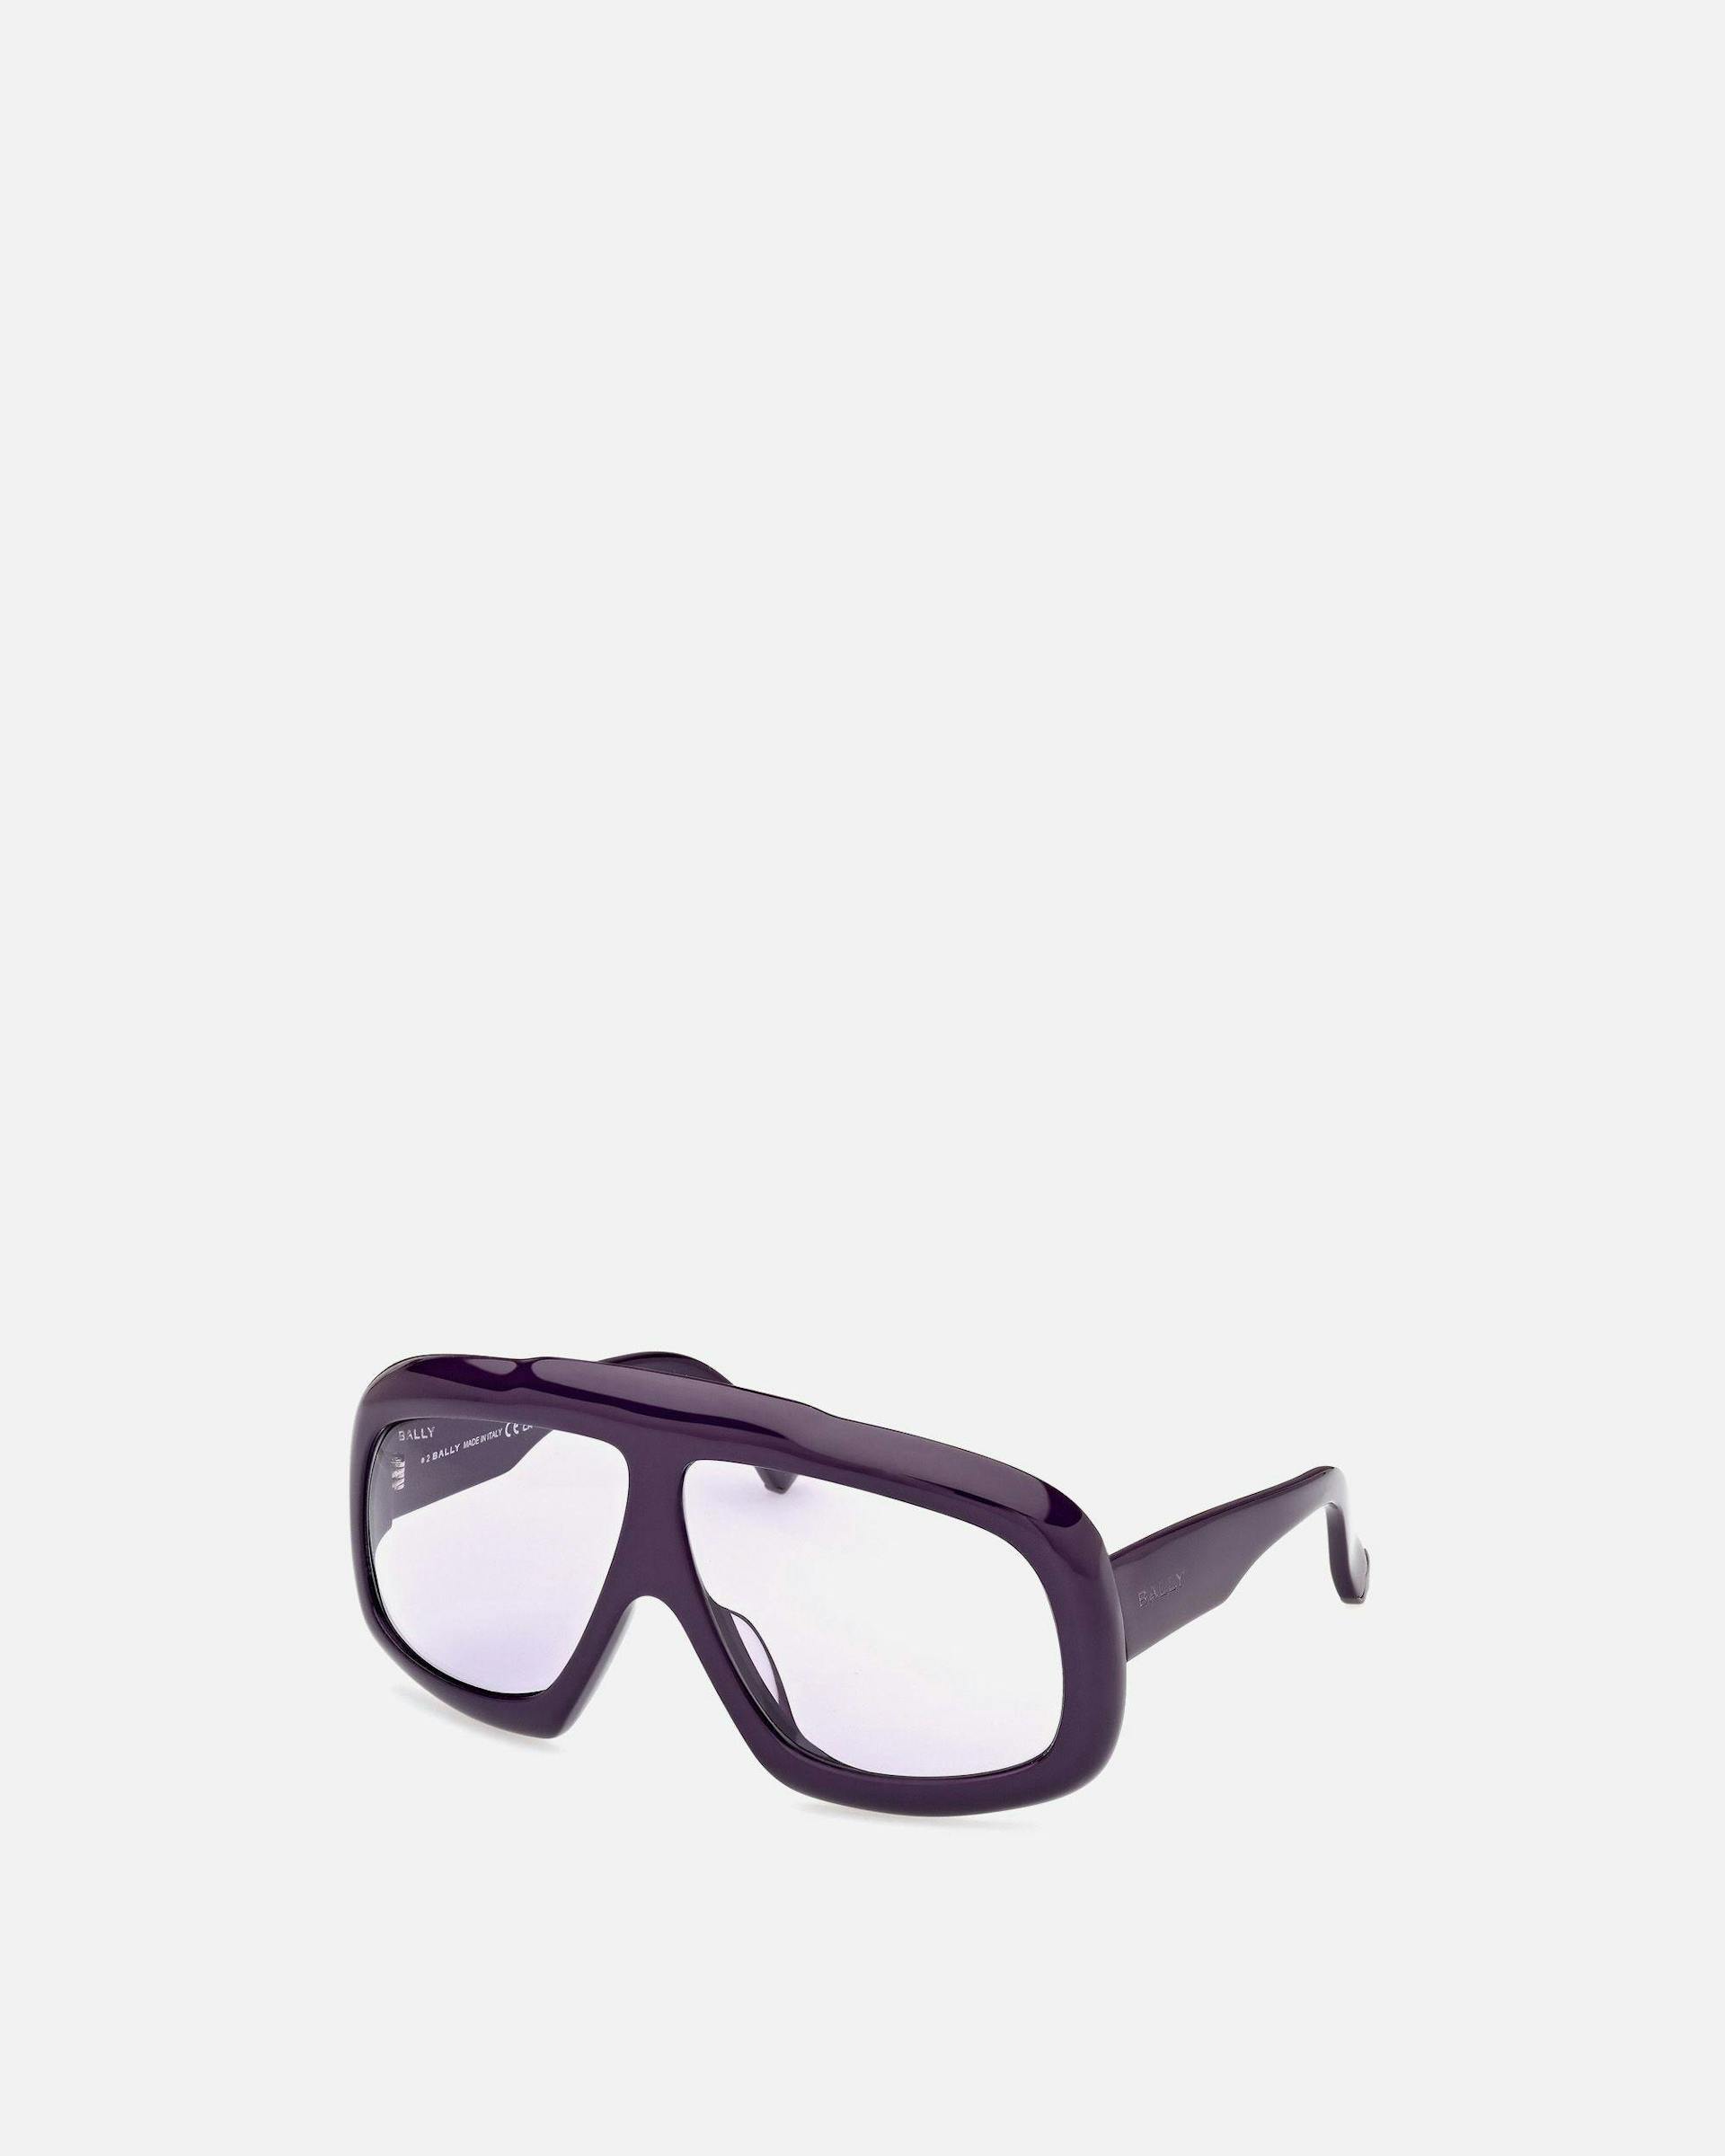 Eyger Acetate Sunglasses in Purple and Lilac | Bally | Still Life 3/4 Side